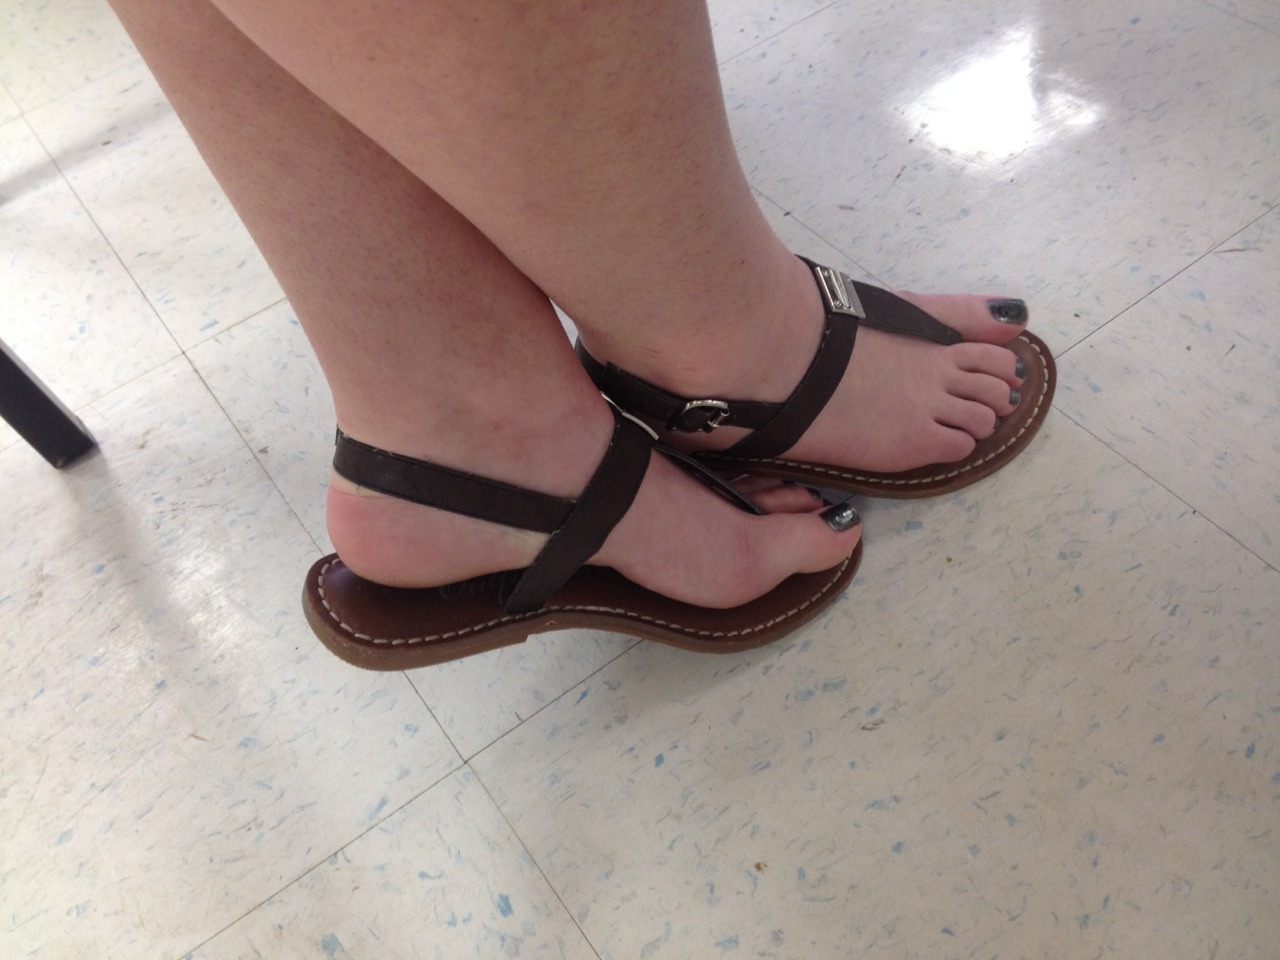 Kittehfeets New American Eagle Sandals Its